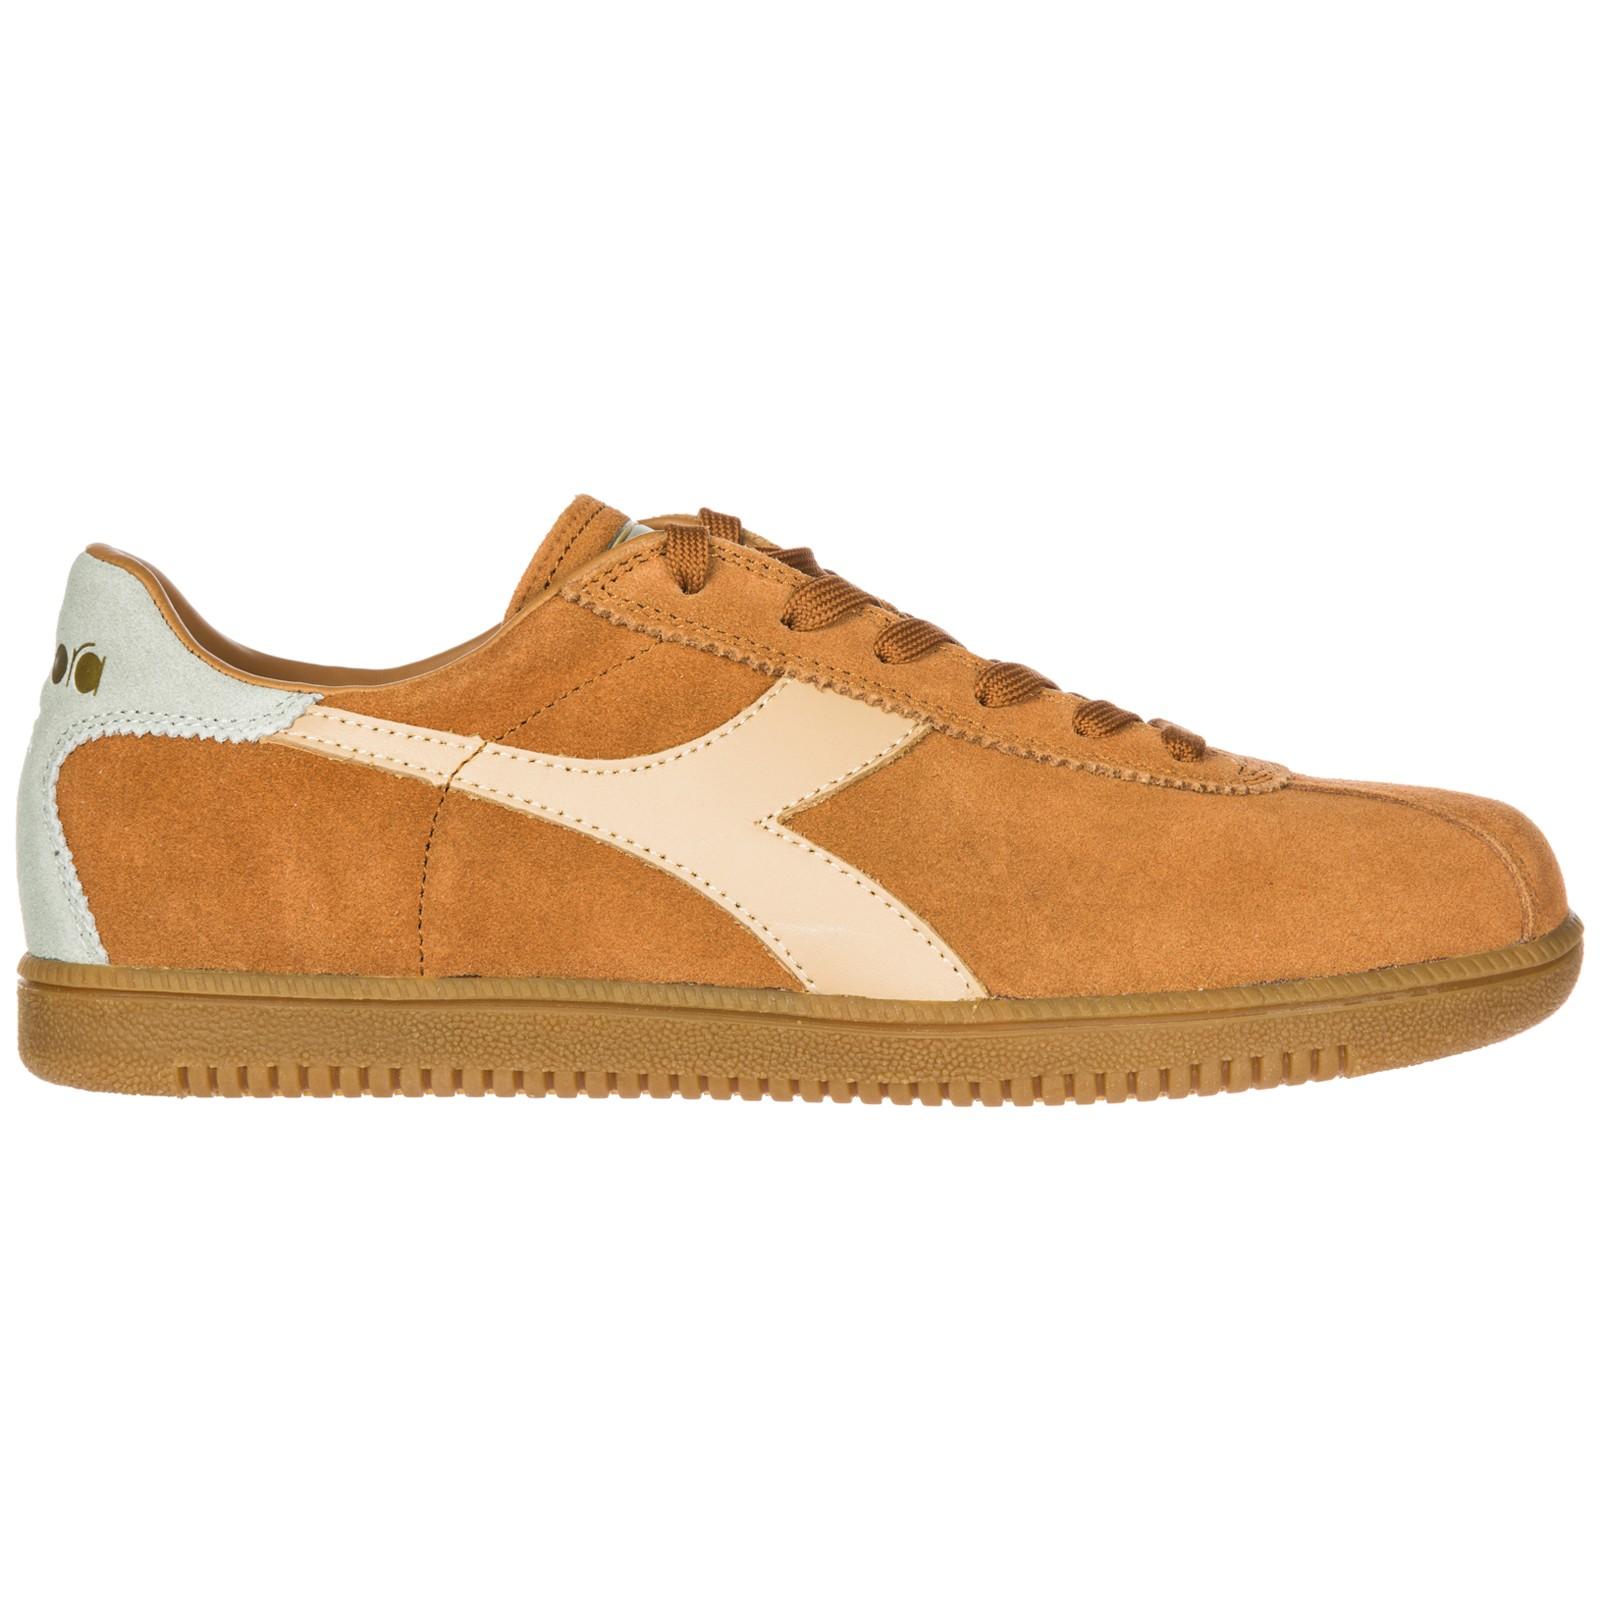 Diadora Tokyo Pompeian Red 80's Casual Trainers RRP £75 Free UK P&P!